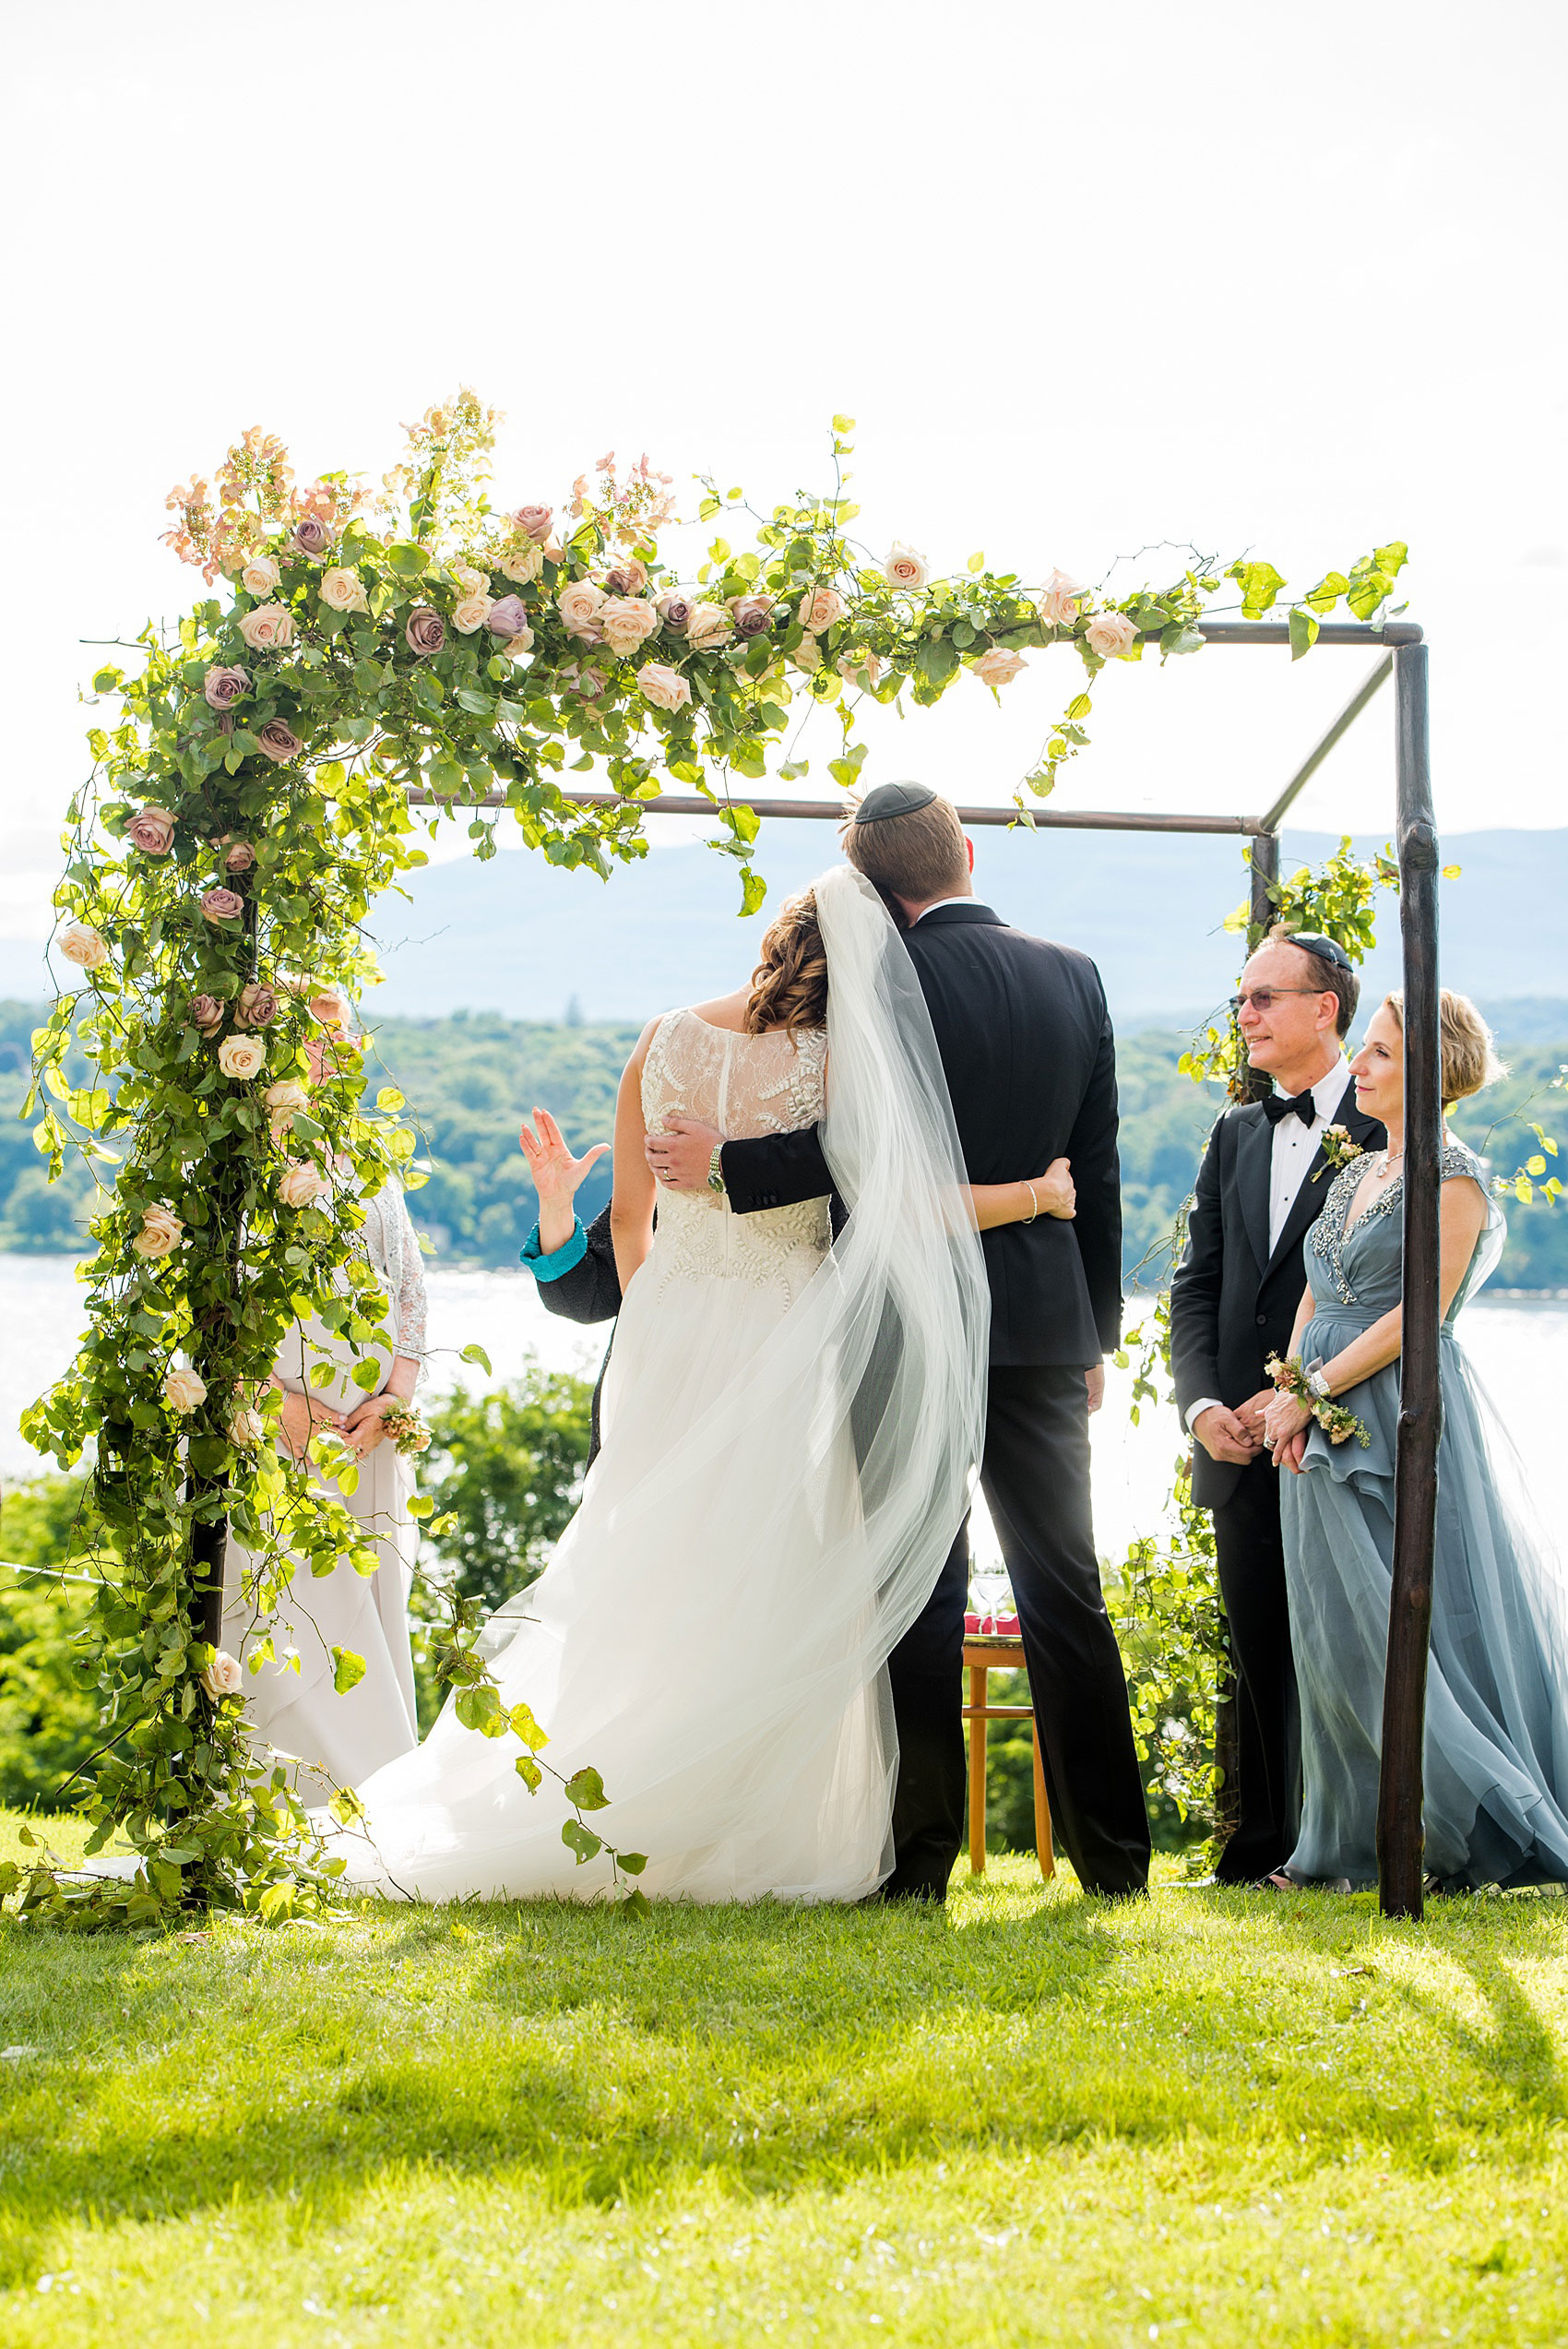 Mikkel Paige Photography photos from a Southwood Estate Wedding in Germantown, New York in the Hudson Valley. Picture of the bride and groom under the chuppah during the ceremony overlooking the Hudson Valley mountains and river.